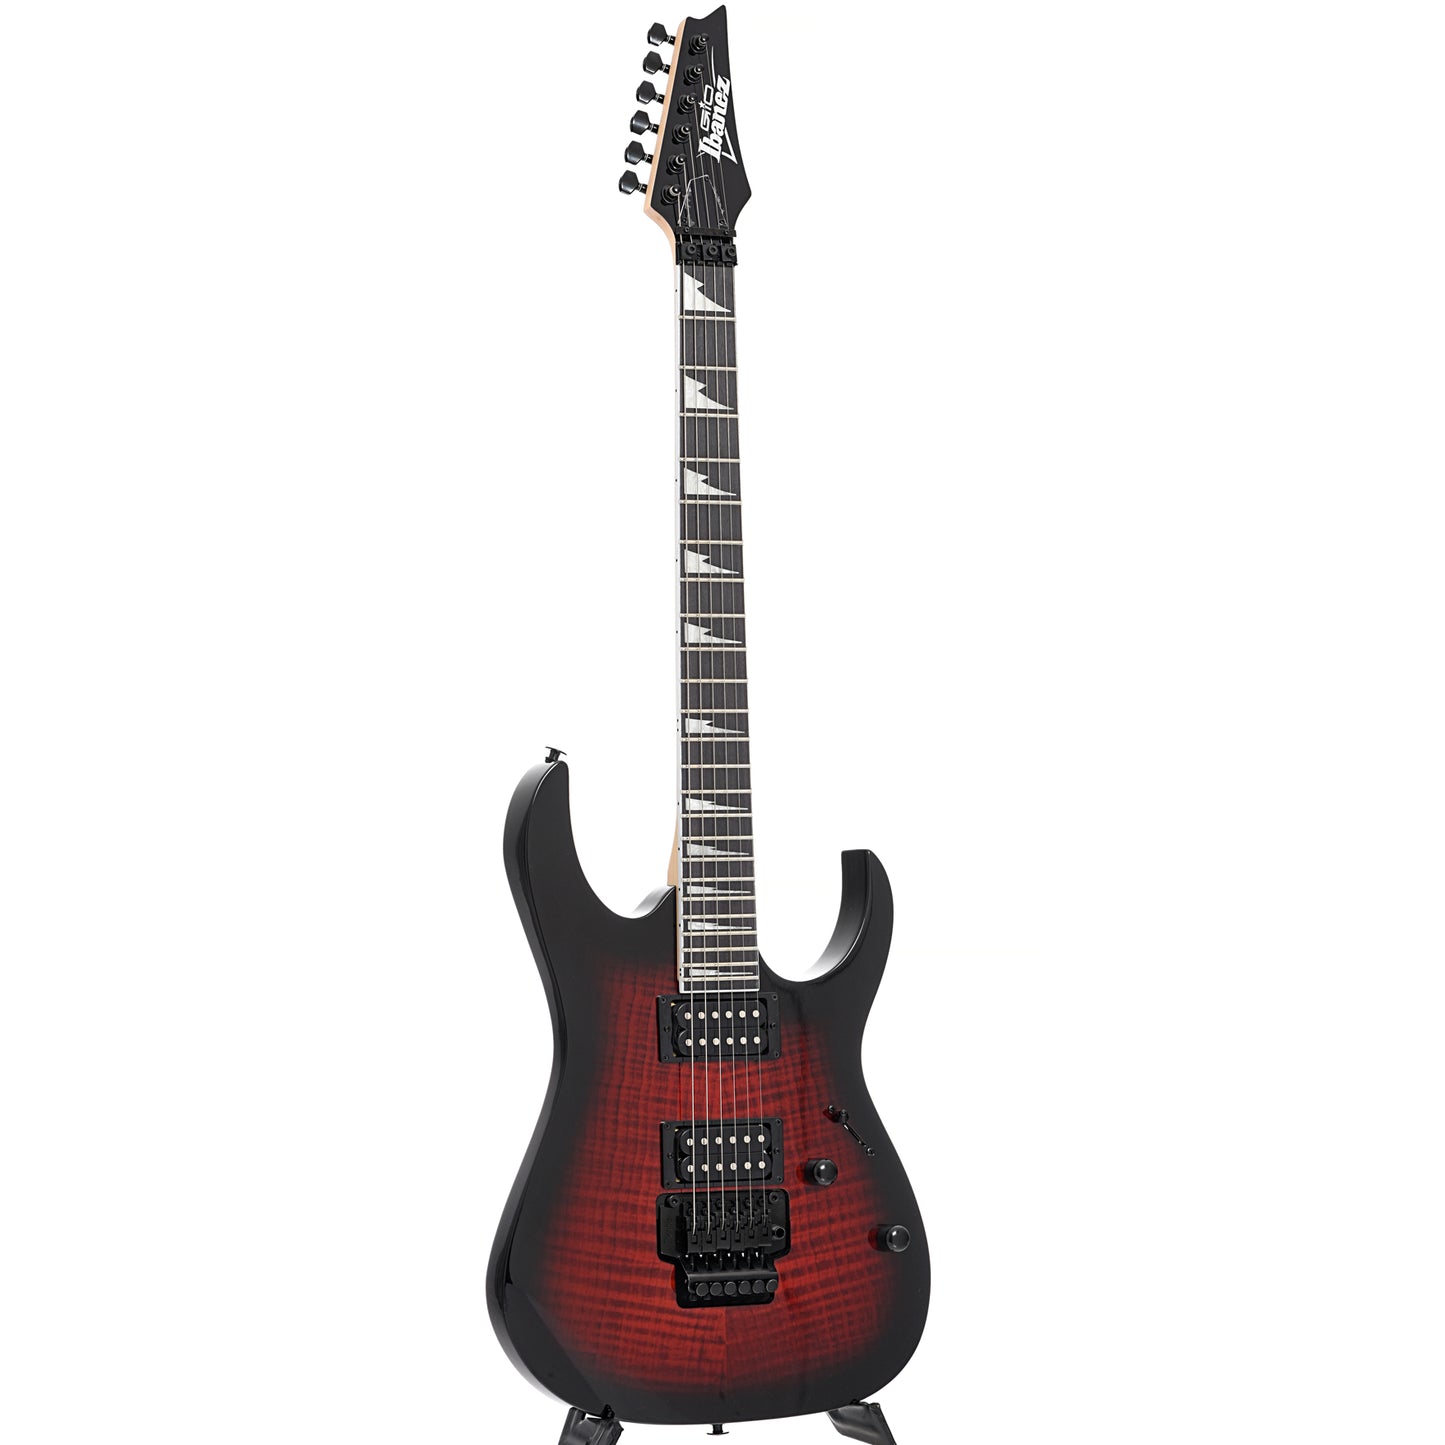 Full front and side of Ibanez Gio GRG320FA Electric Guitar, Transparent Red Burst